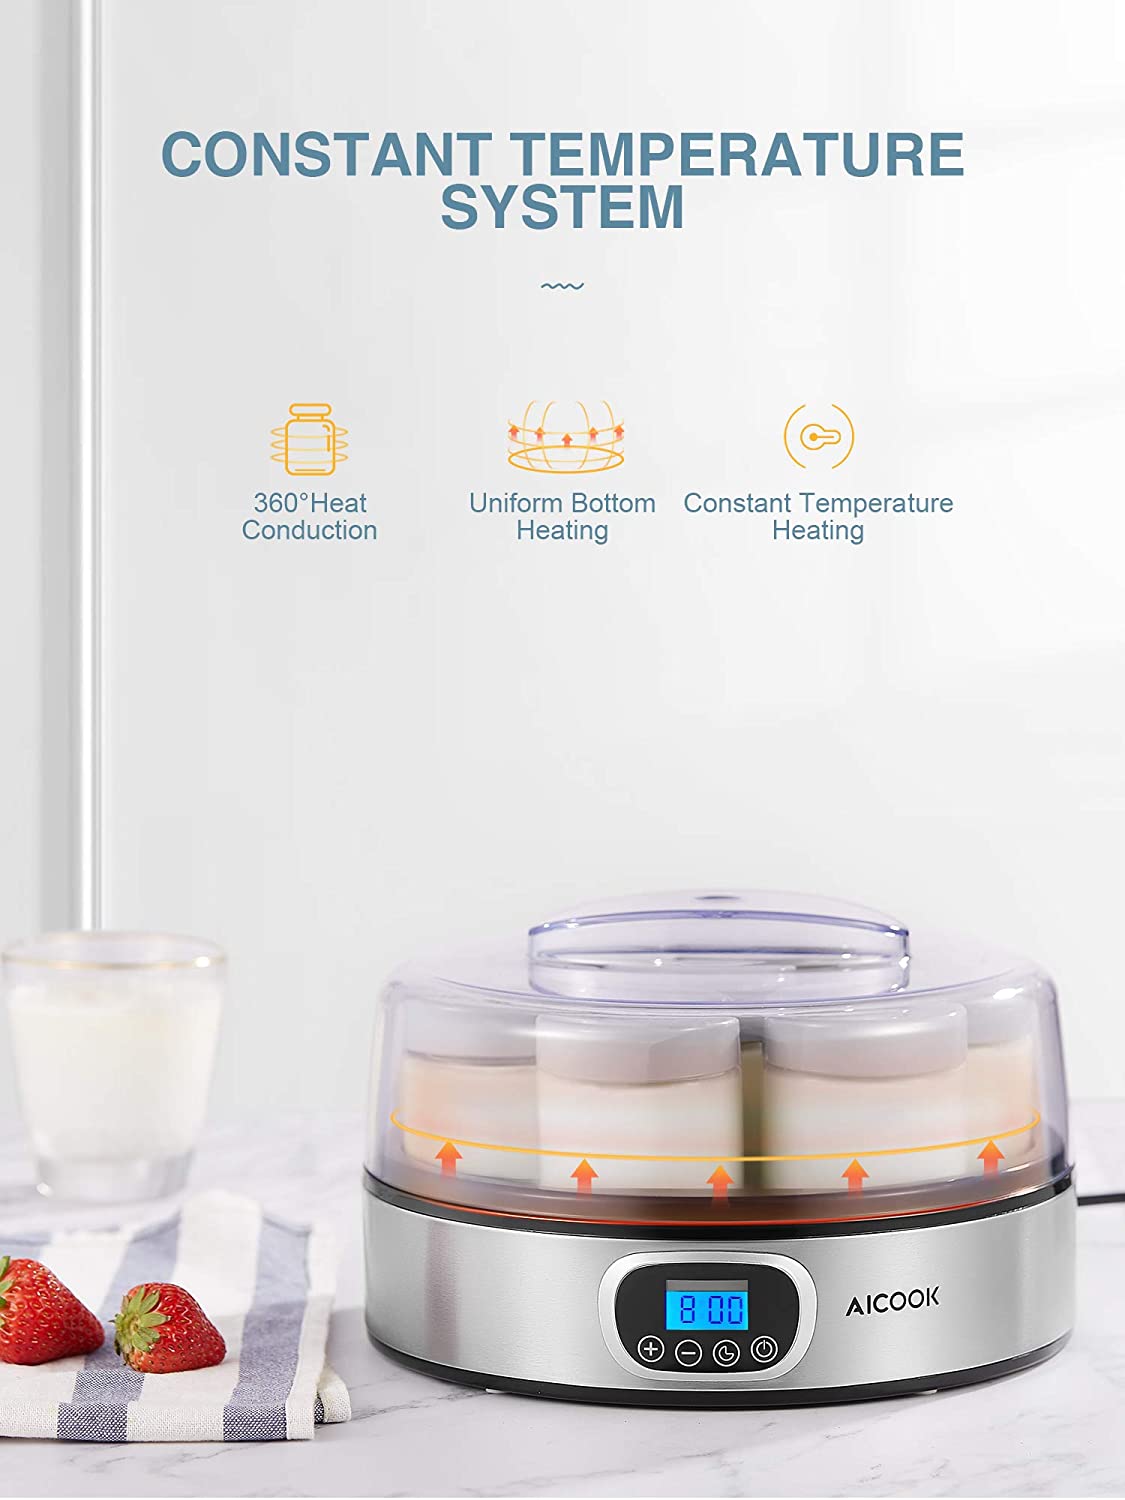  Yogurt Maker Automatic Digital Yoghurt Maker Machine with 8  Glass Jars 48 Ozs (6Oz Each Jar) LCD Display with Constant Temperature  Control Stainless Steel Design for Home Use: Home & Kitchen